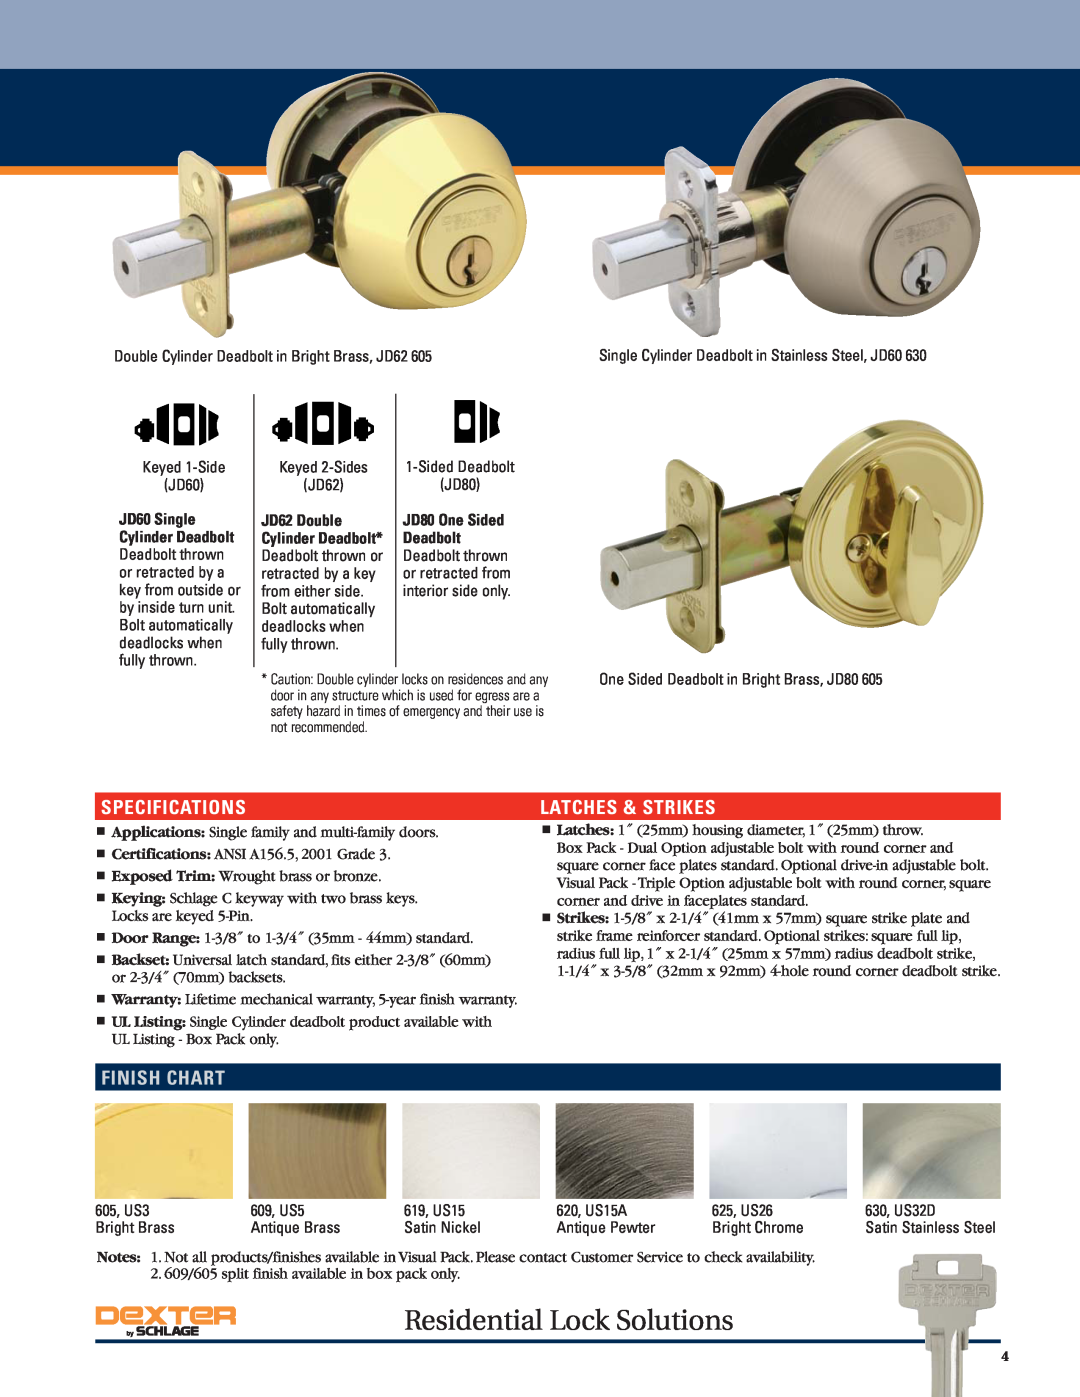 Schlage manual Residential Lock Solutions, Specifications, Finish Chart, Latches & Strikes 